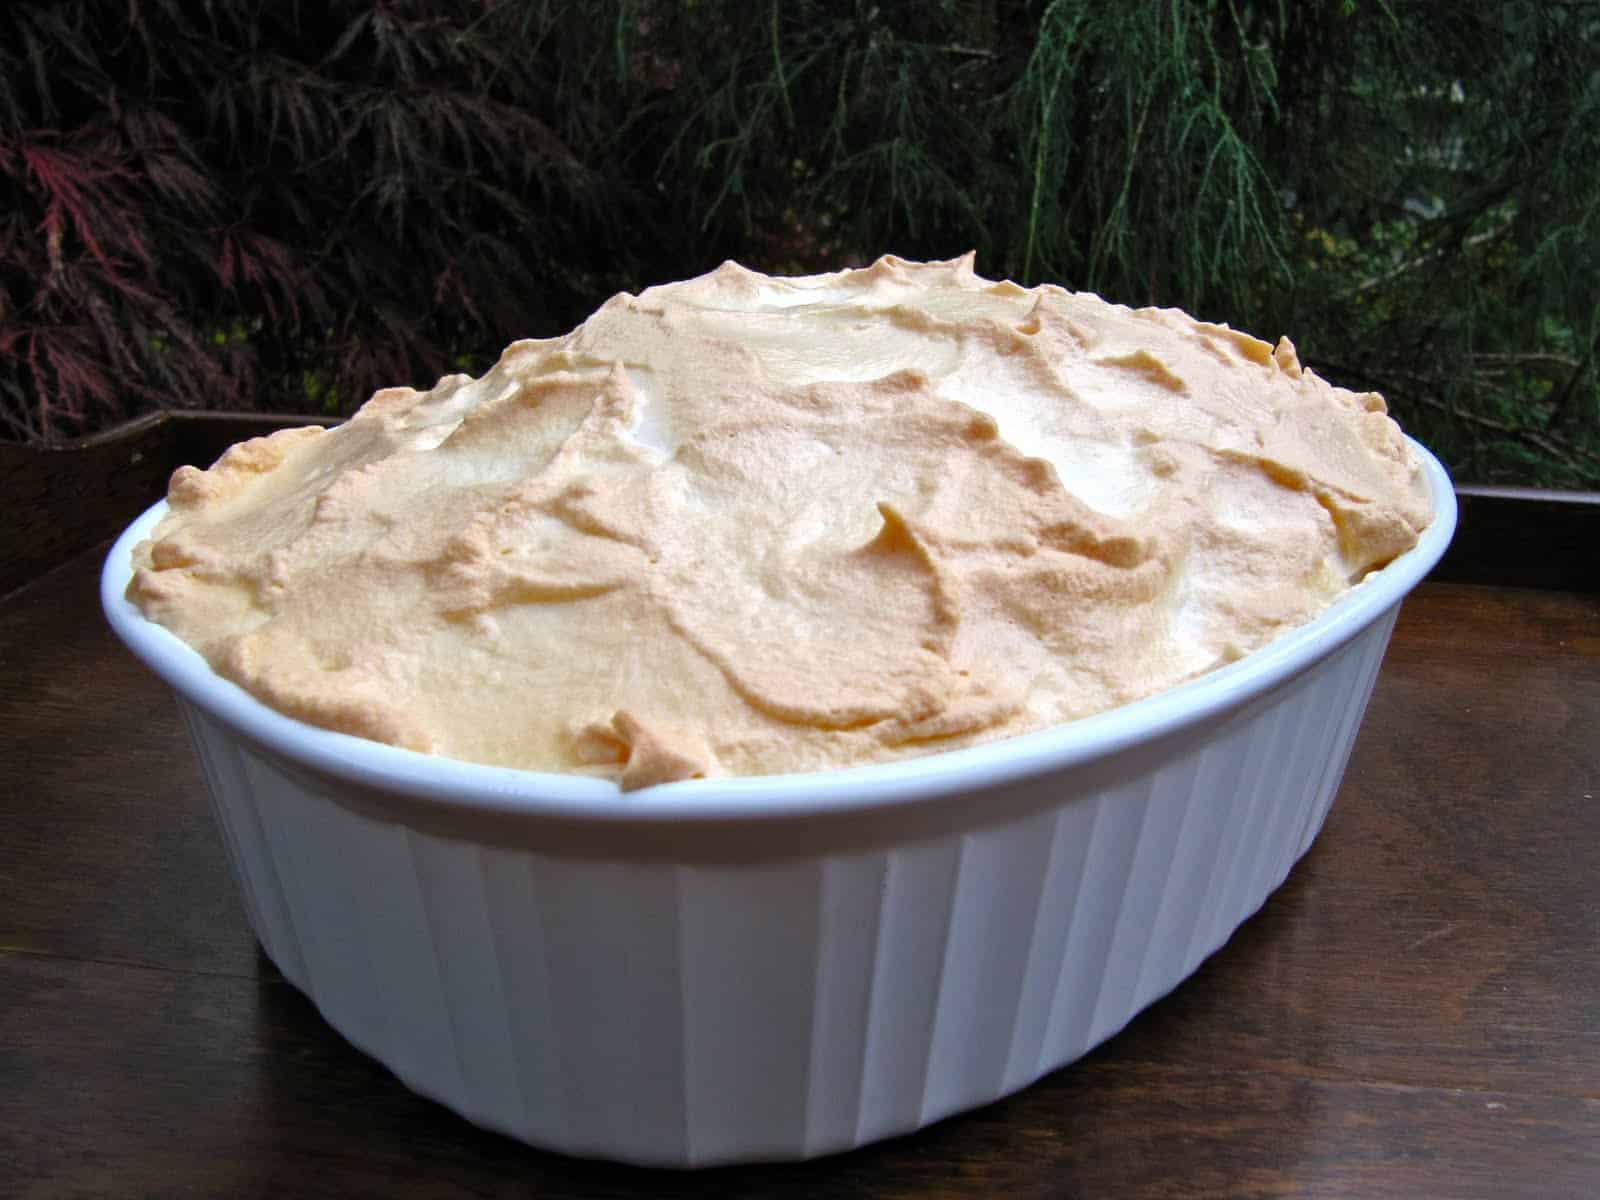 A layer of golden meringue tops a baking dish filled with Alvine's Bread Pudding.